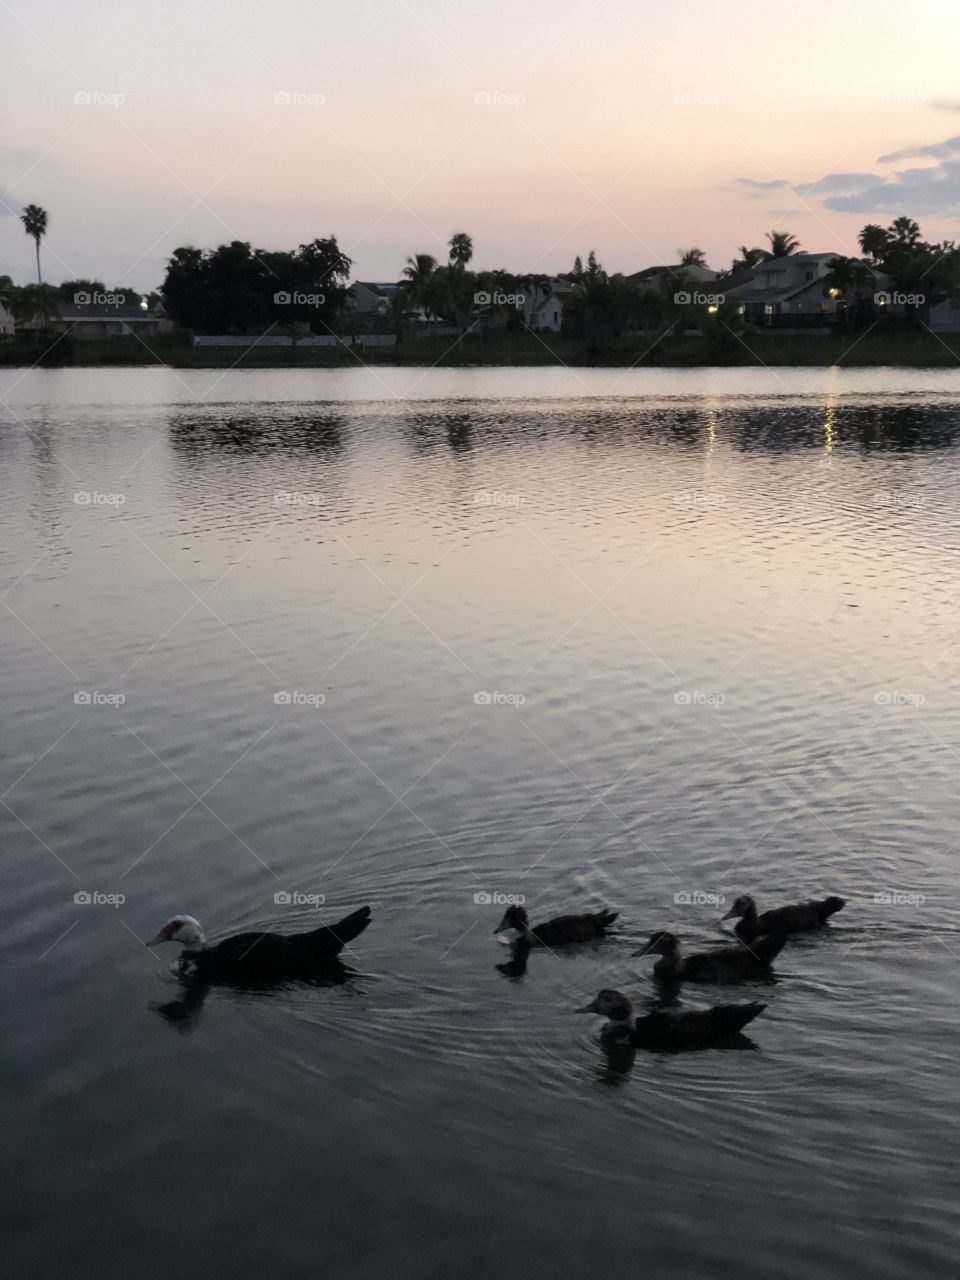 Ducks out for an evening swim